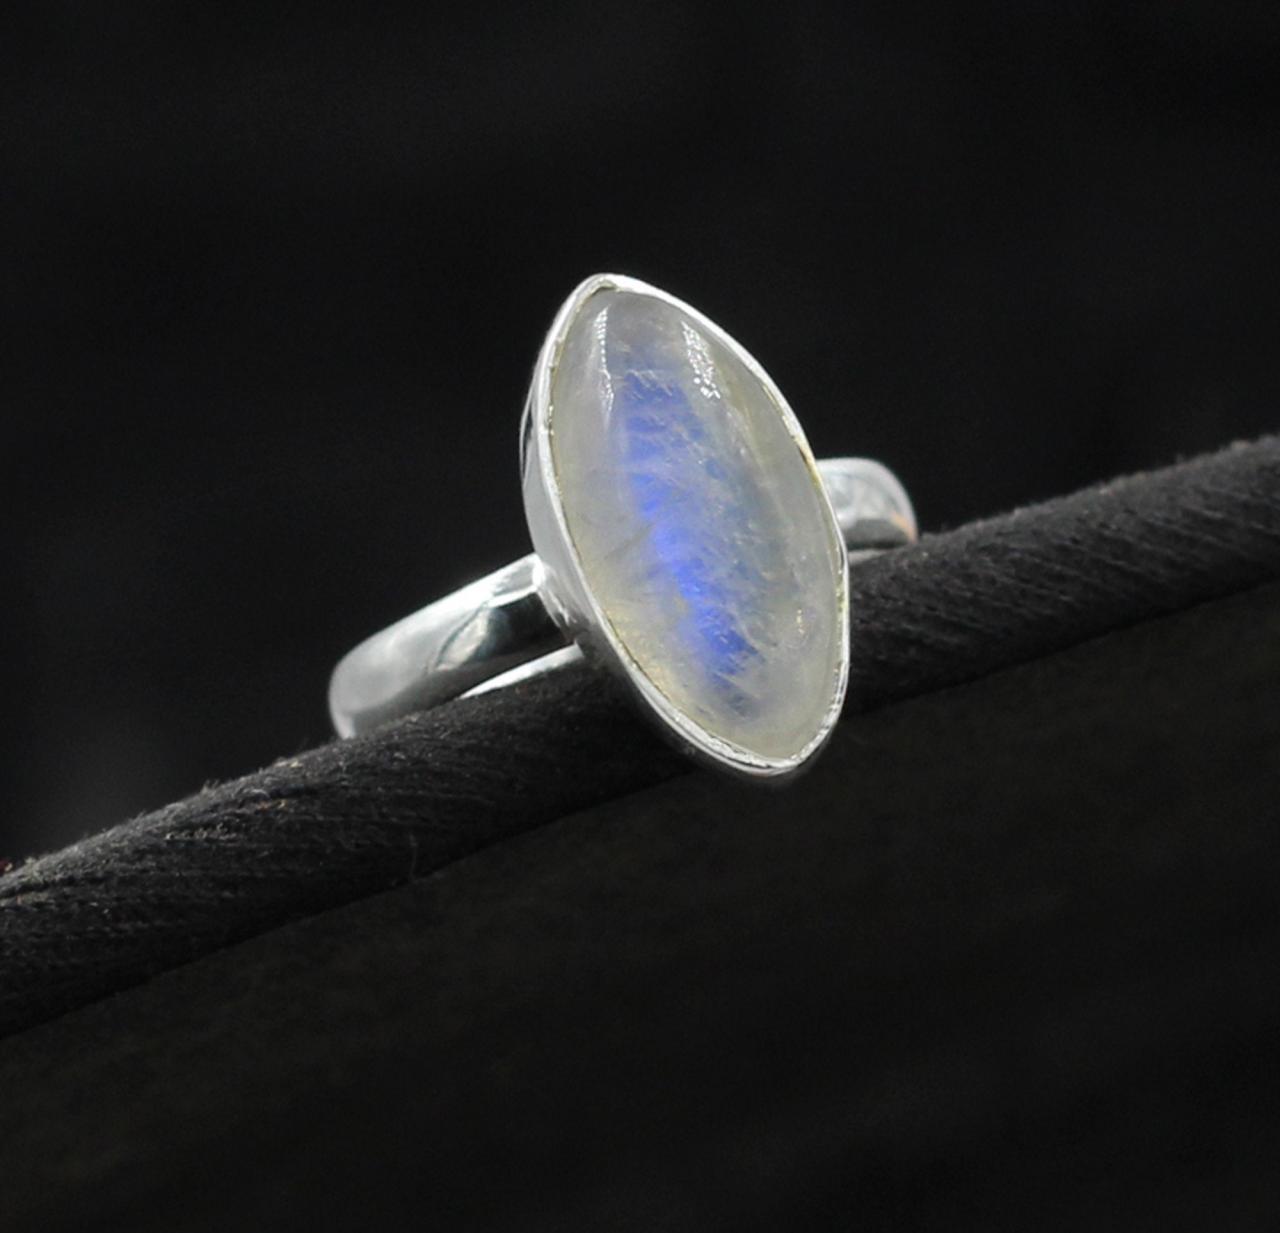 Lovely Moonstone Ring,everyday Ring,solid 925 Sterling Silver Handmade Jewelry,birthday Gift,surprise Gift For Girl Friend,cabochon Gemstone